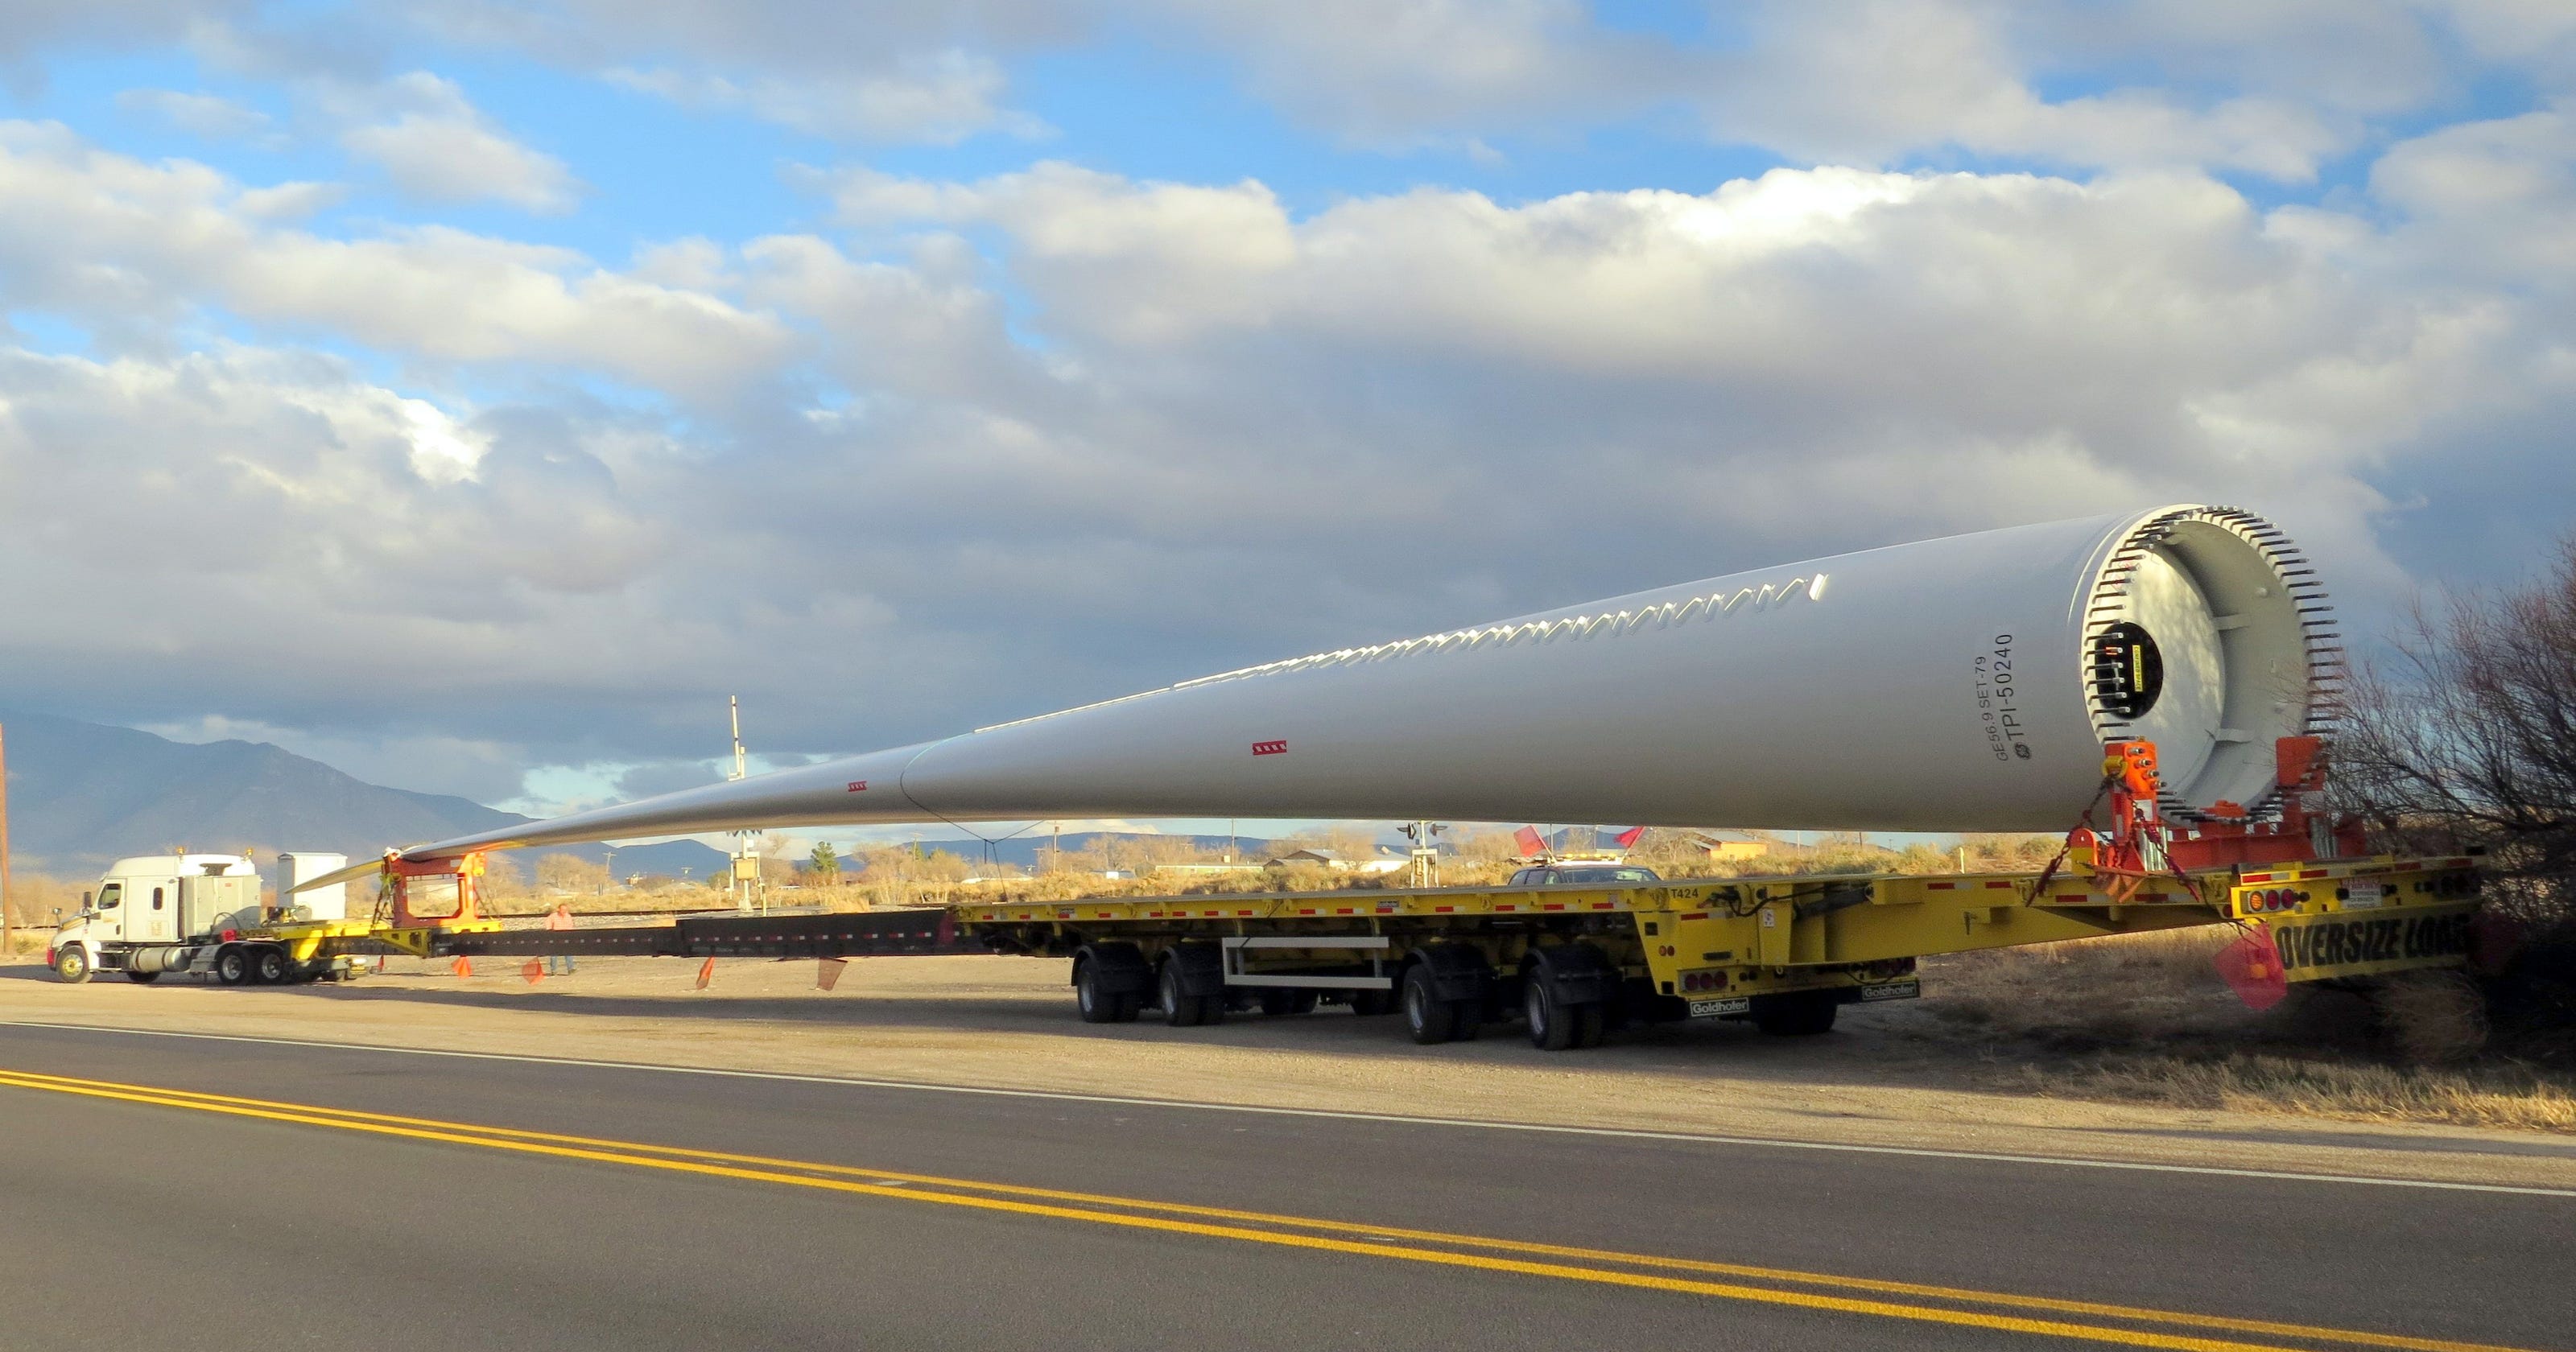 Turbine blade, probably on its way north to a wind farm ...